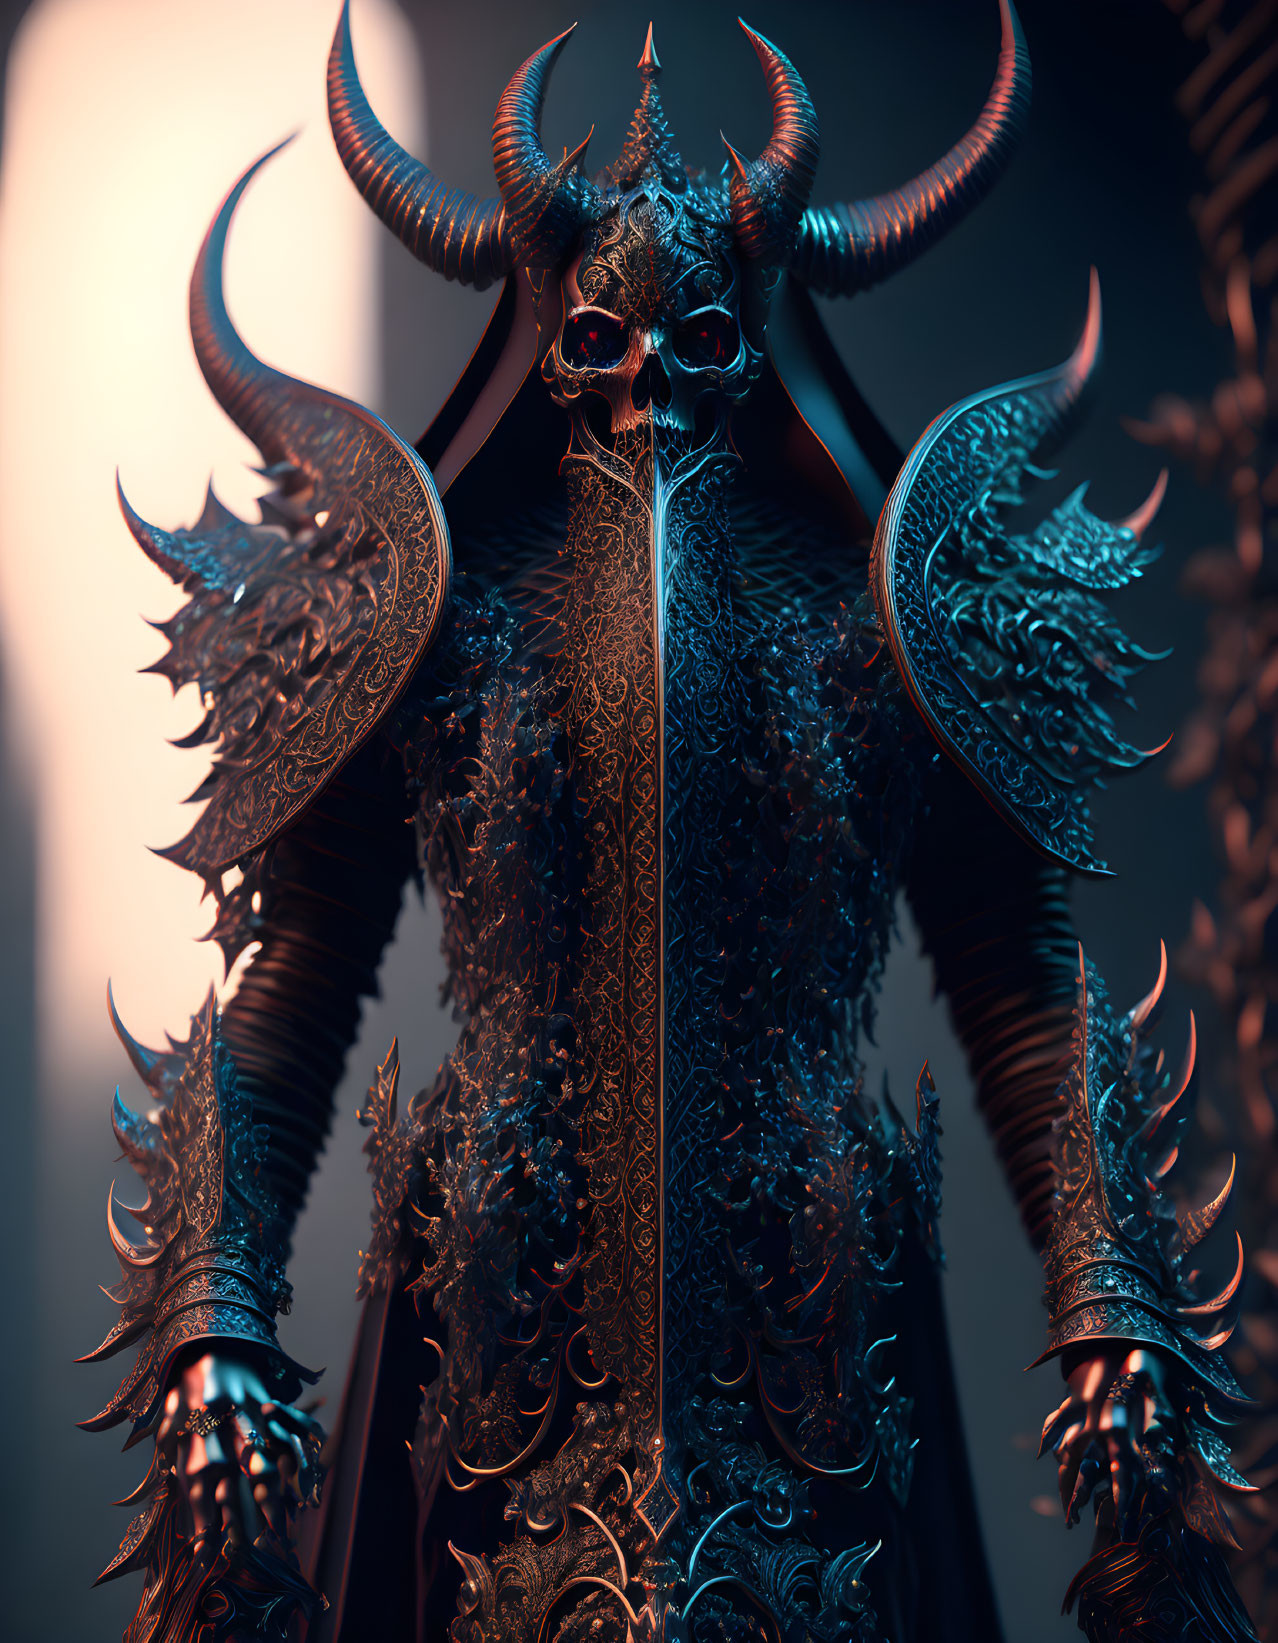 Dark armored figure with spiked shoulders and horns in a malevolent setting